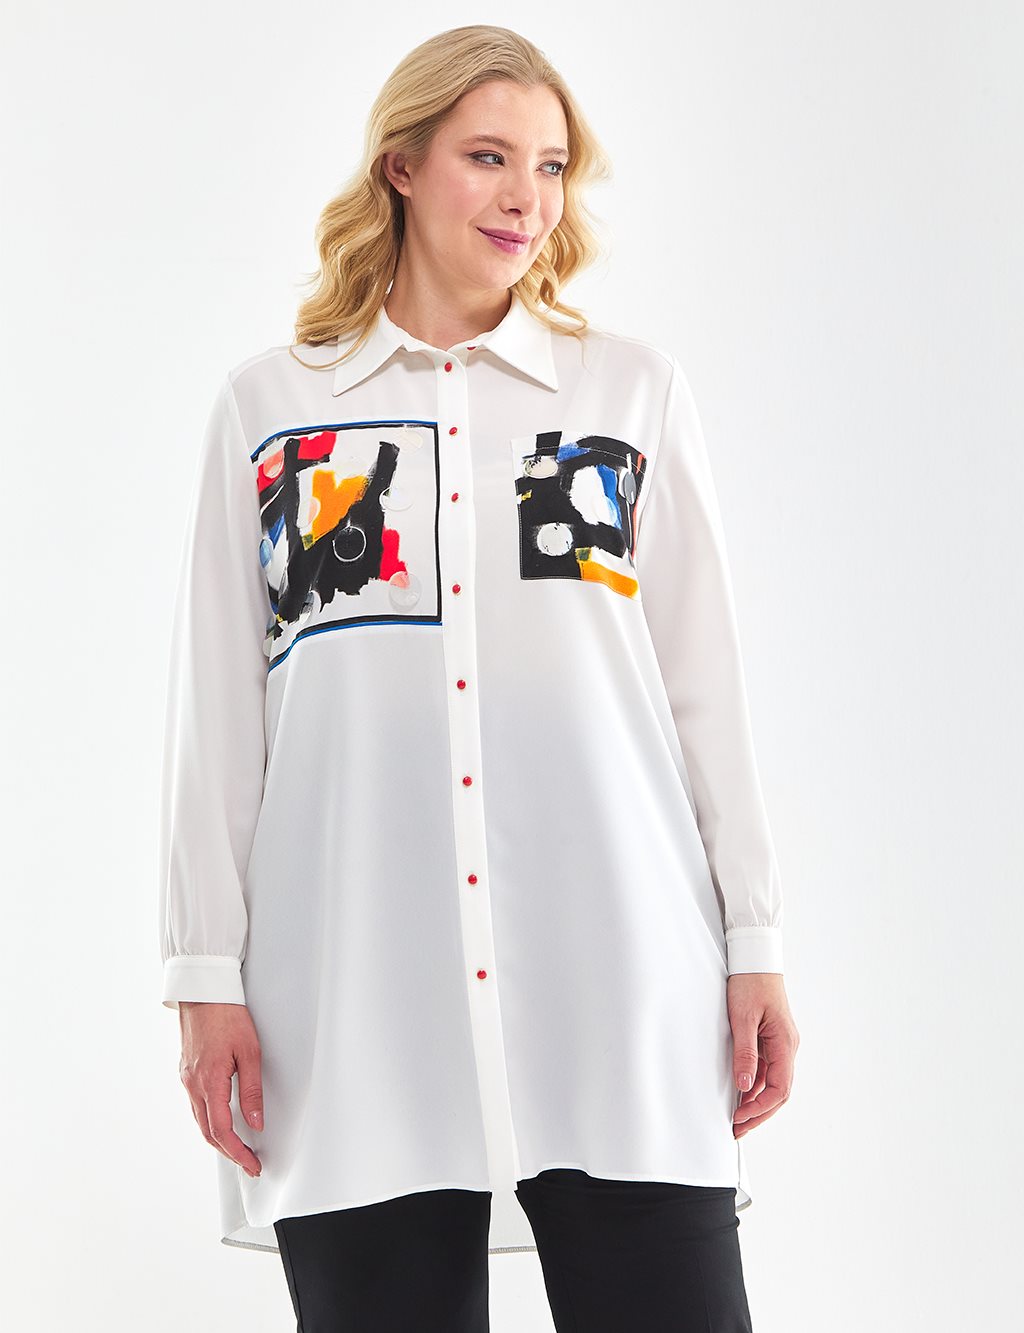 Sequin Abstract Pattern Printed Blouse Optical White